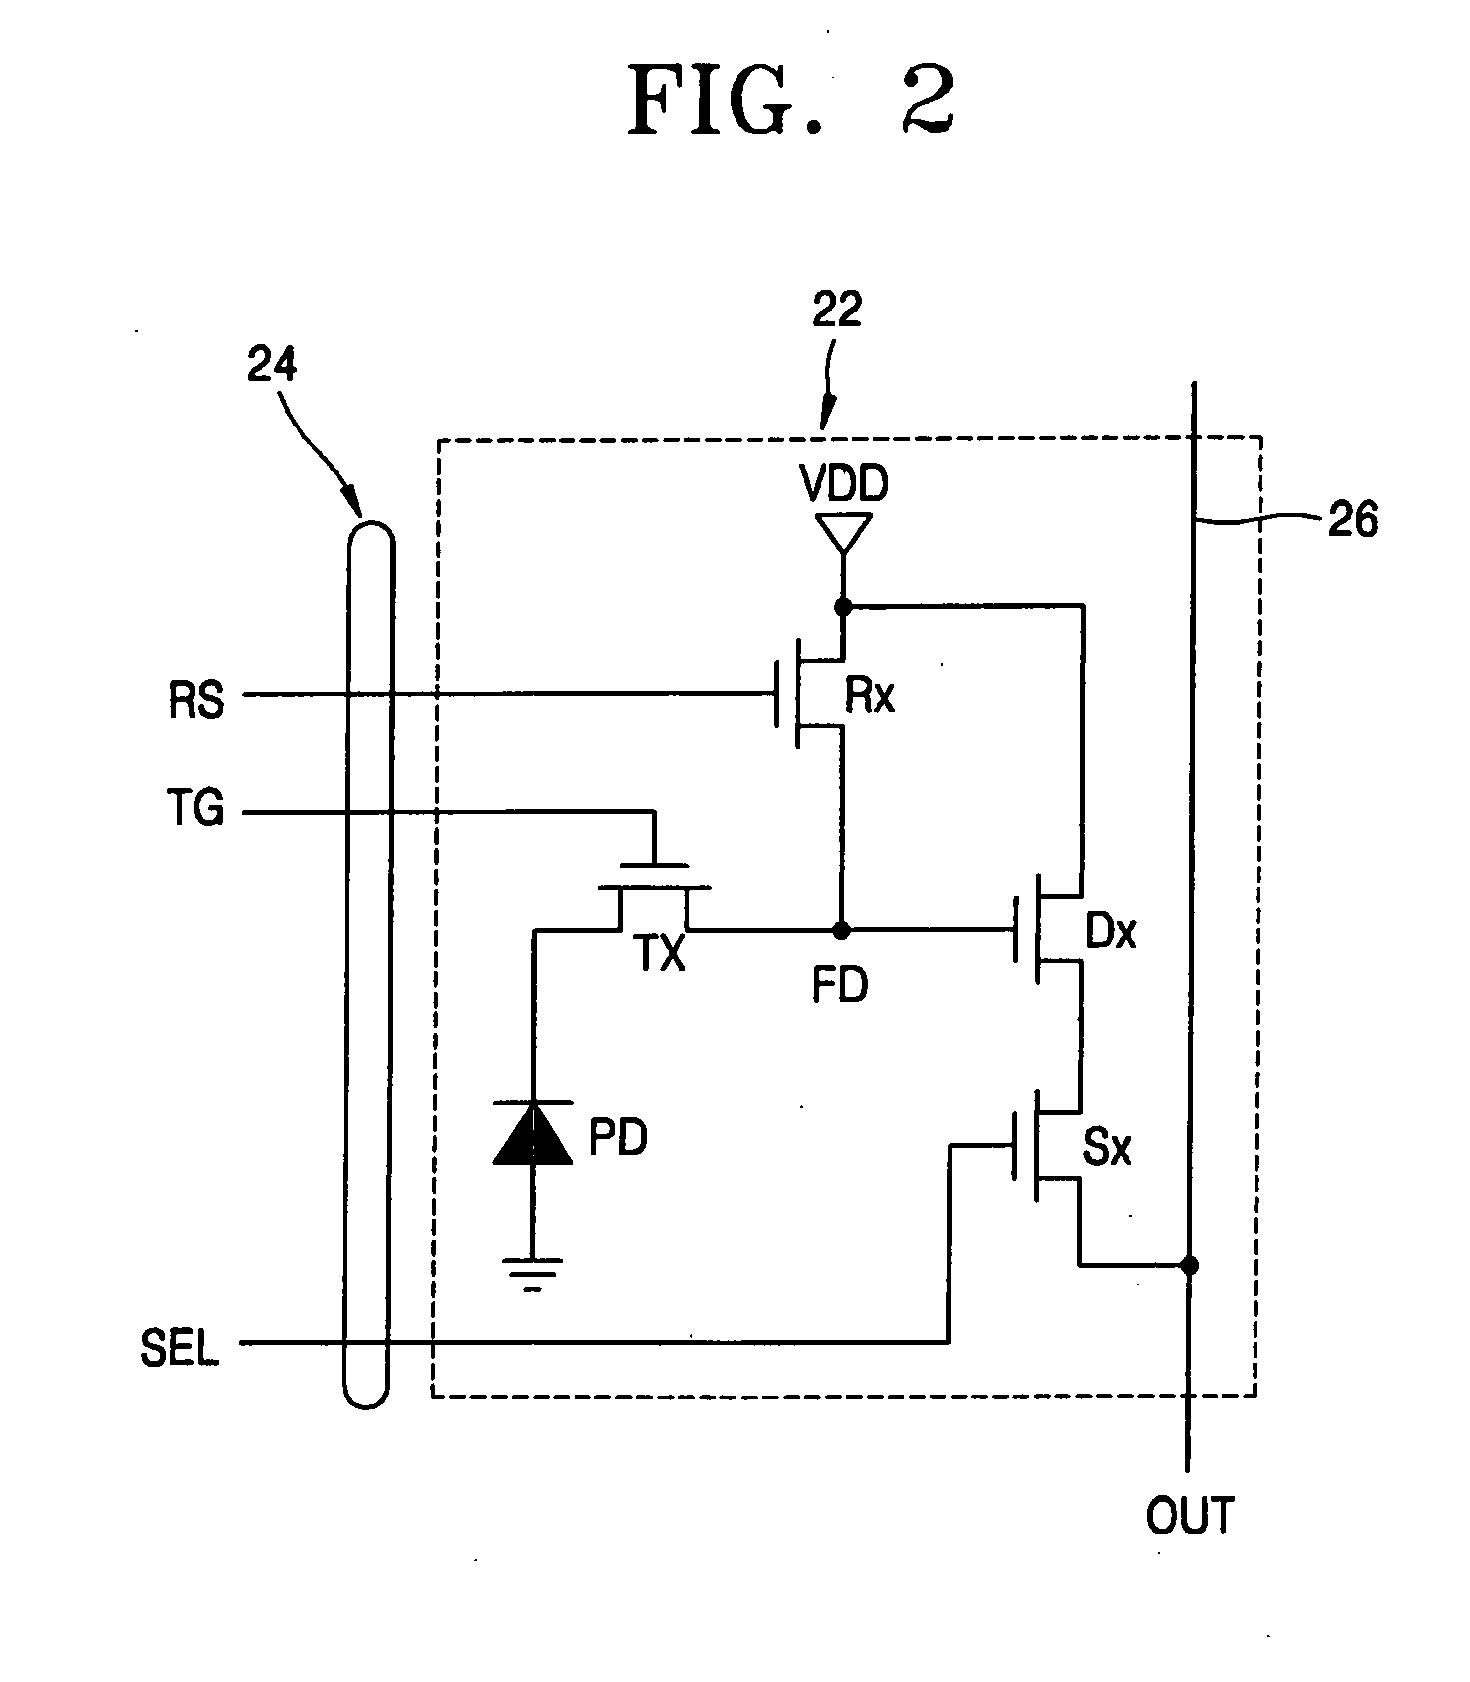 Methods for fabricating solid state image sensor devices having non-planar transistors